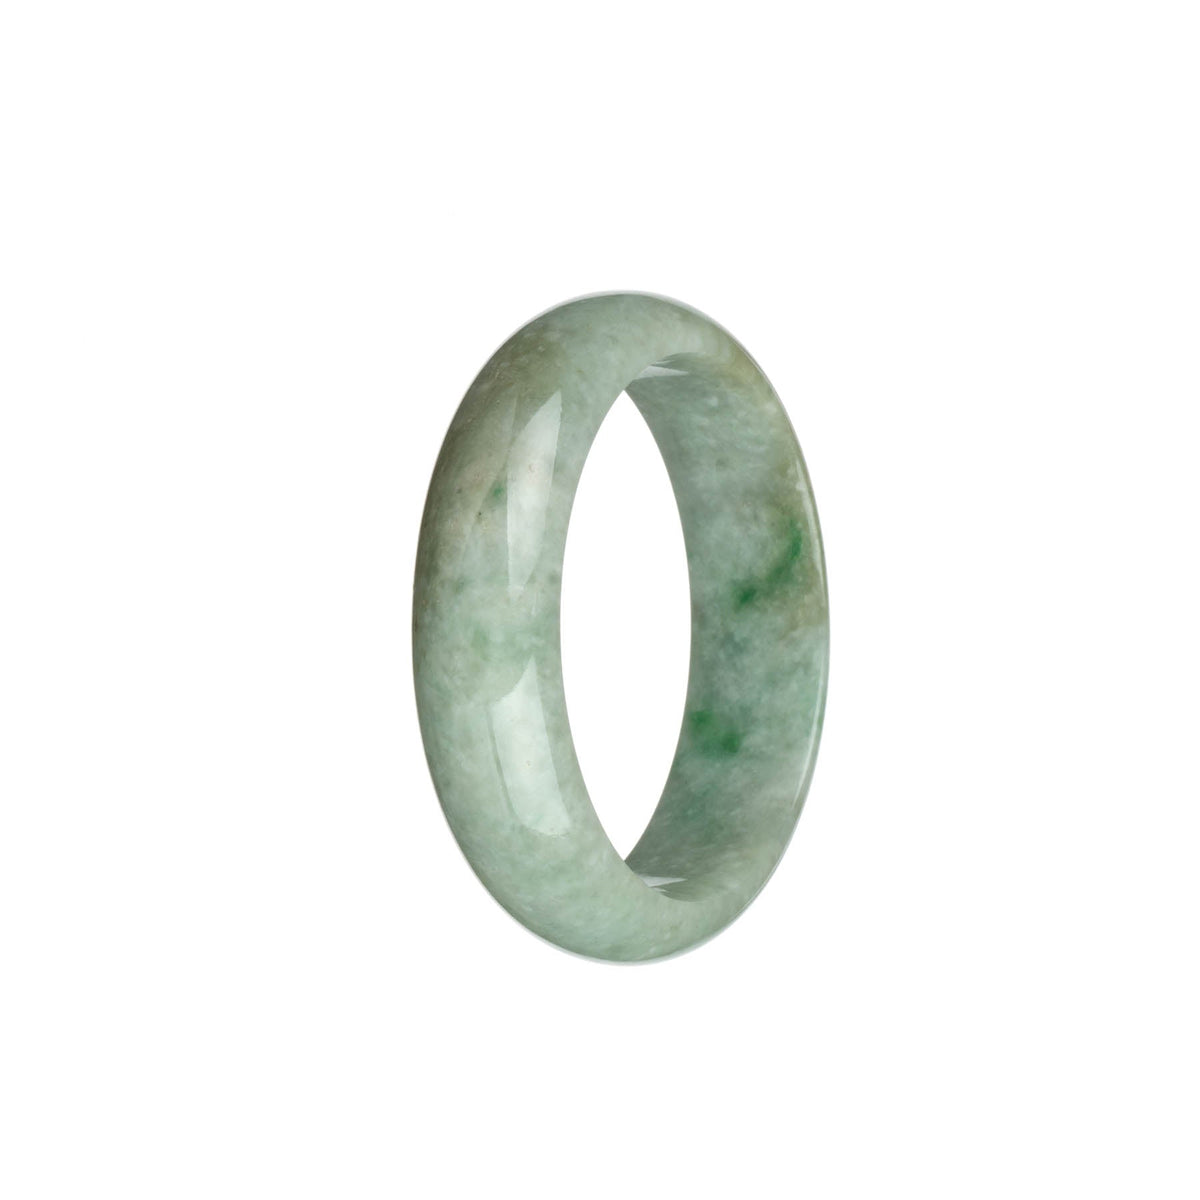 Real Grade A Light Grey with Emerald Green Patterns and Light Brown Patches Burmese Jade Bracelet - 51mm Half Moon